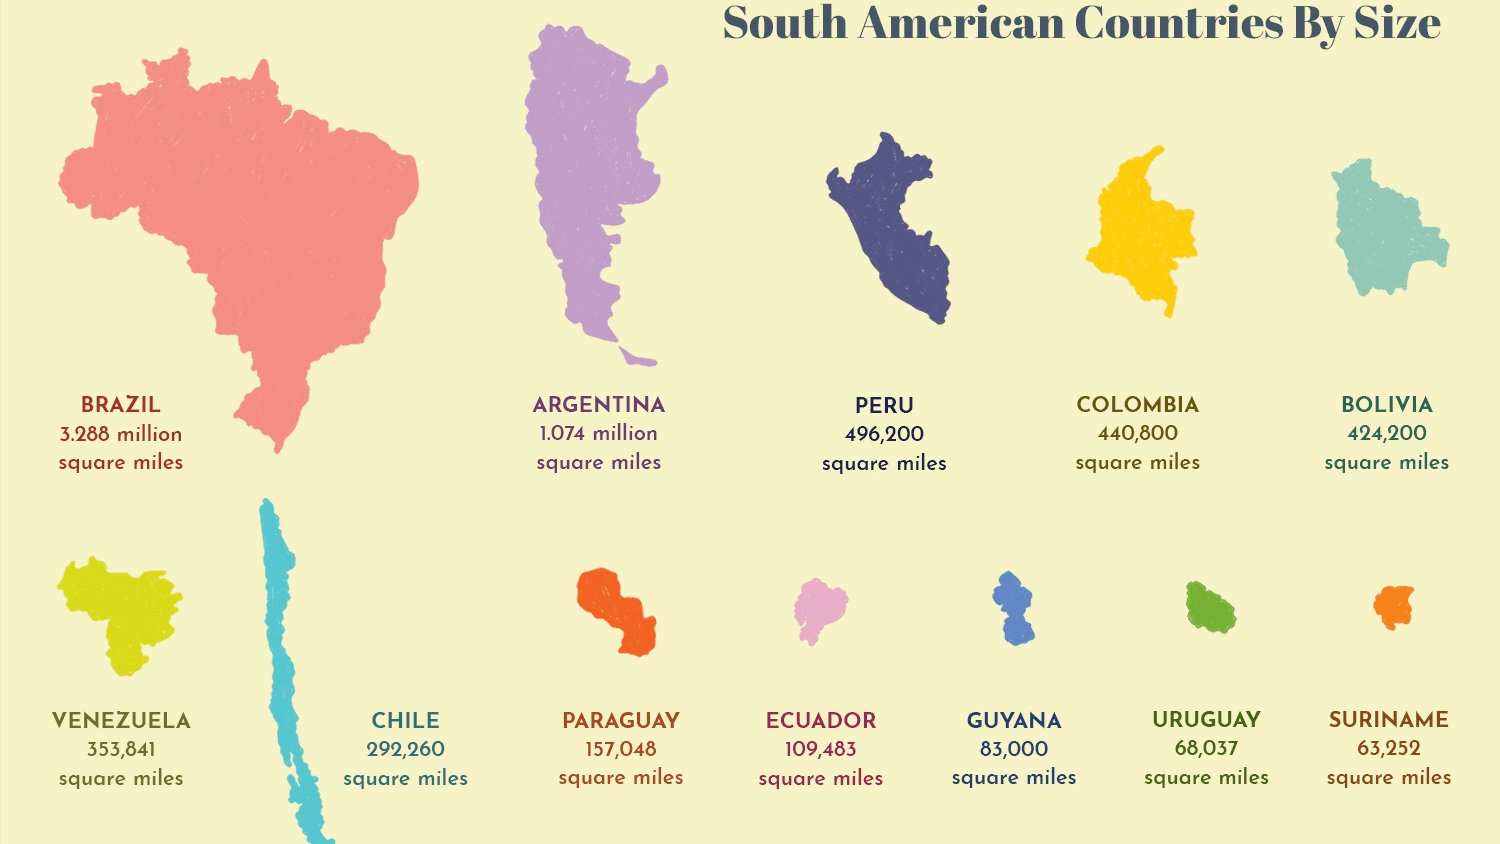 Uruguay is the smallest Spanish-speaking country in South America